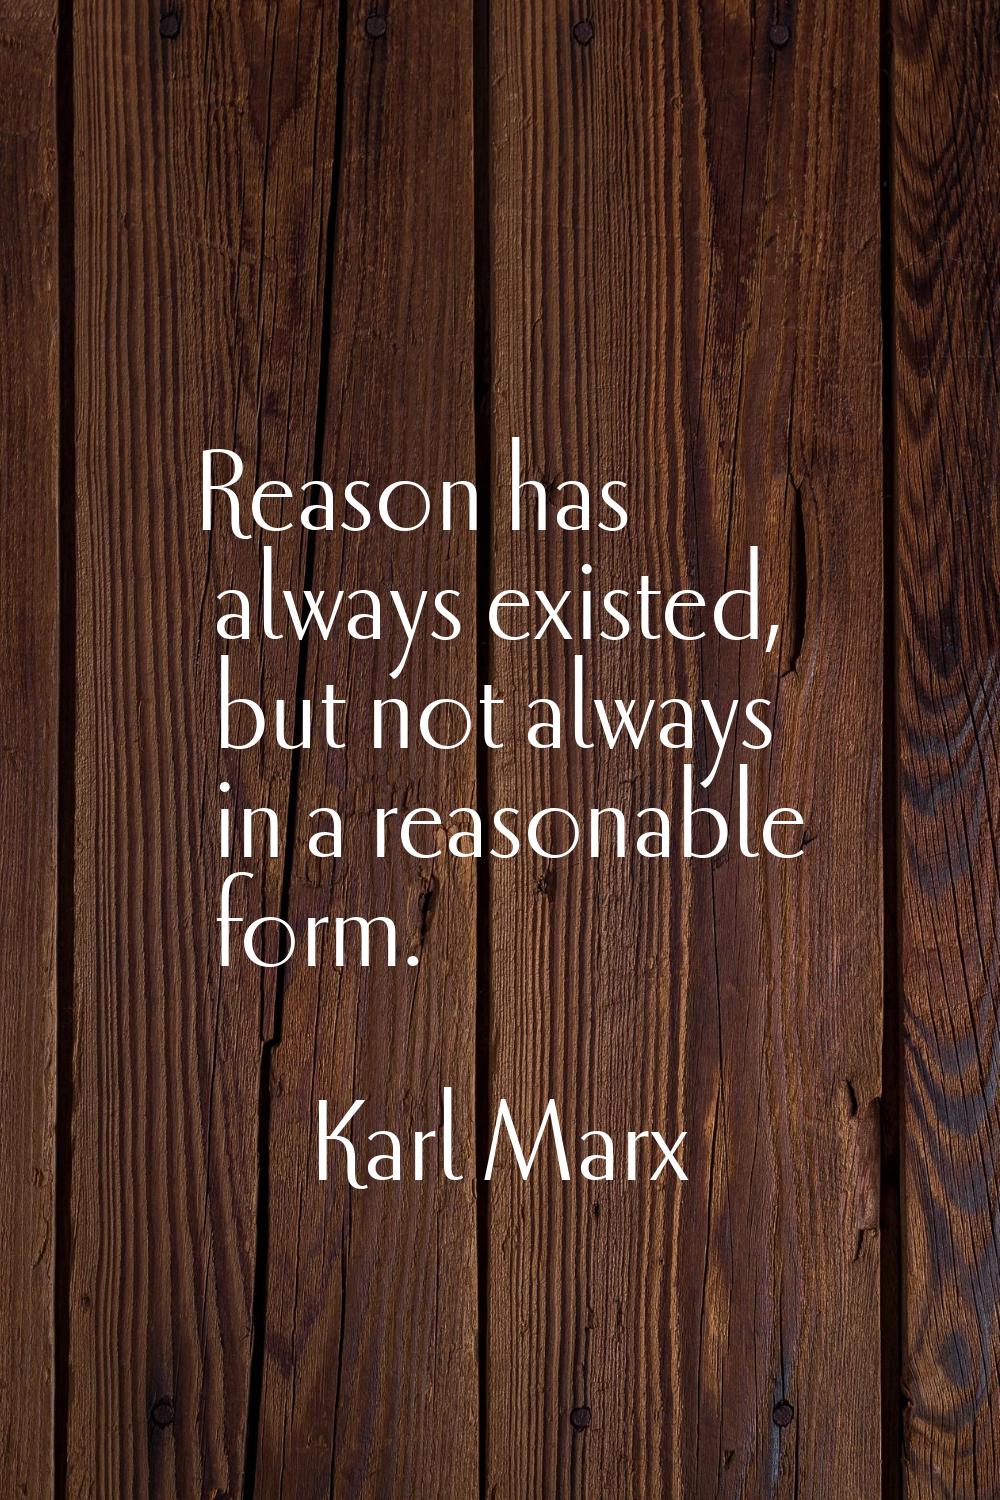 Reason has always existed, but not always in a reasonable form.